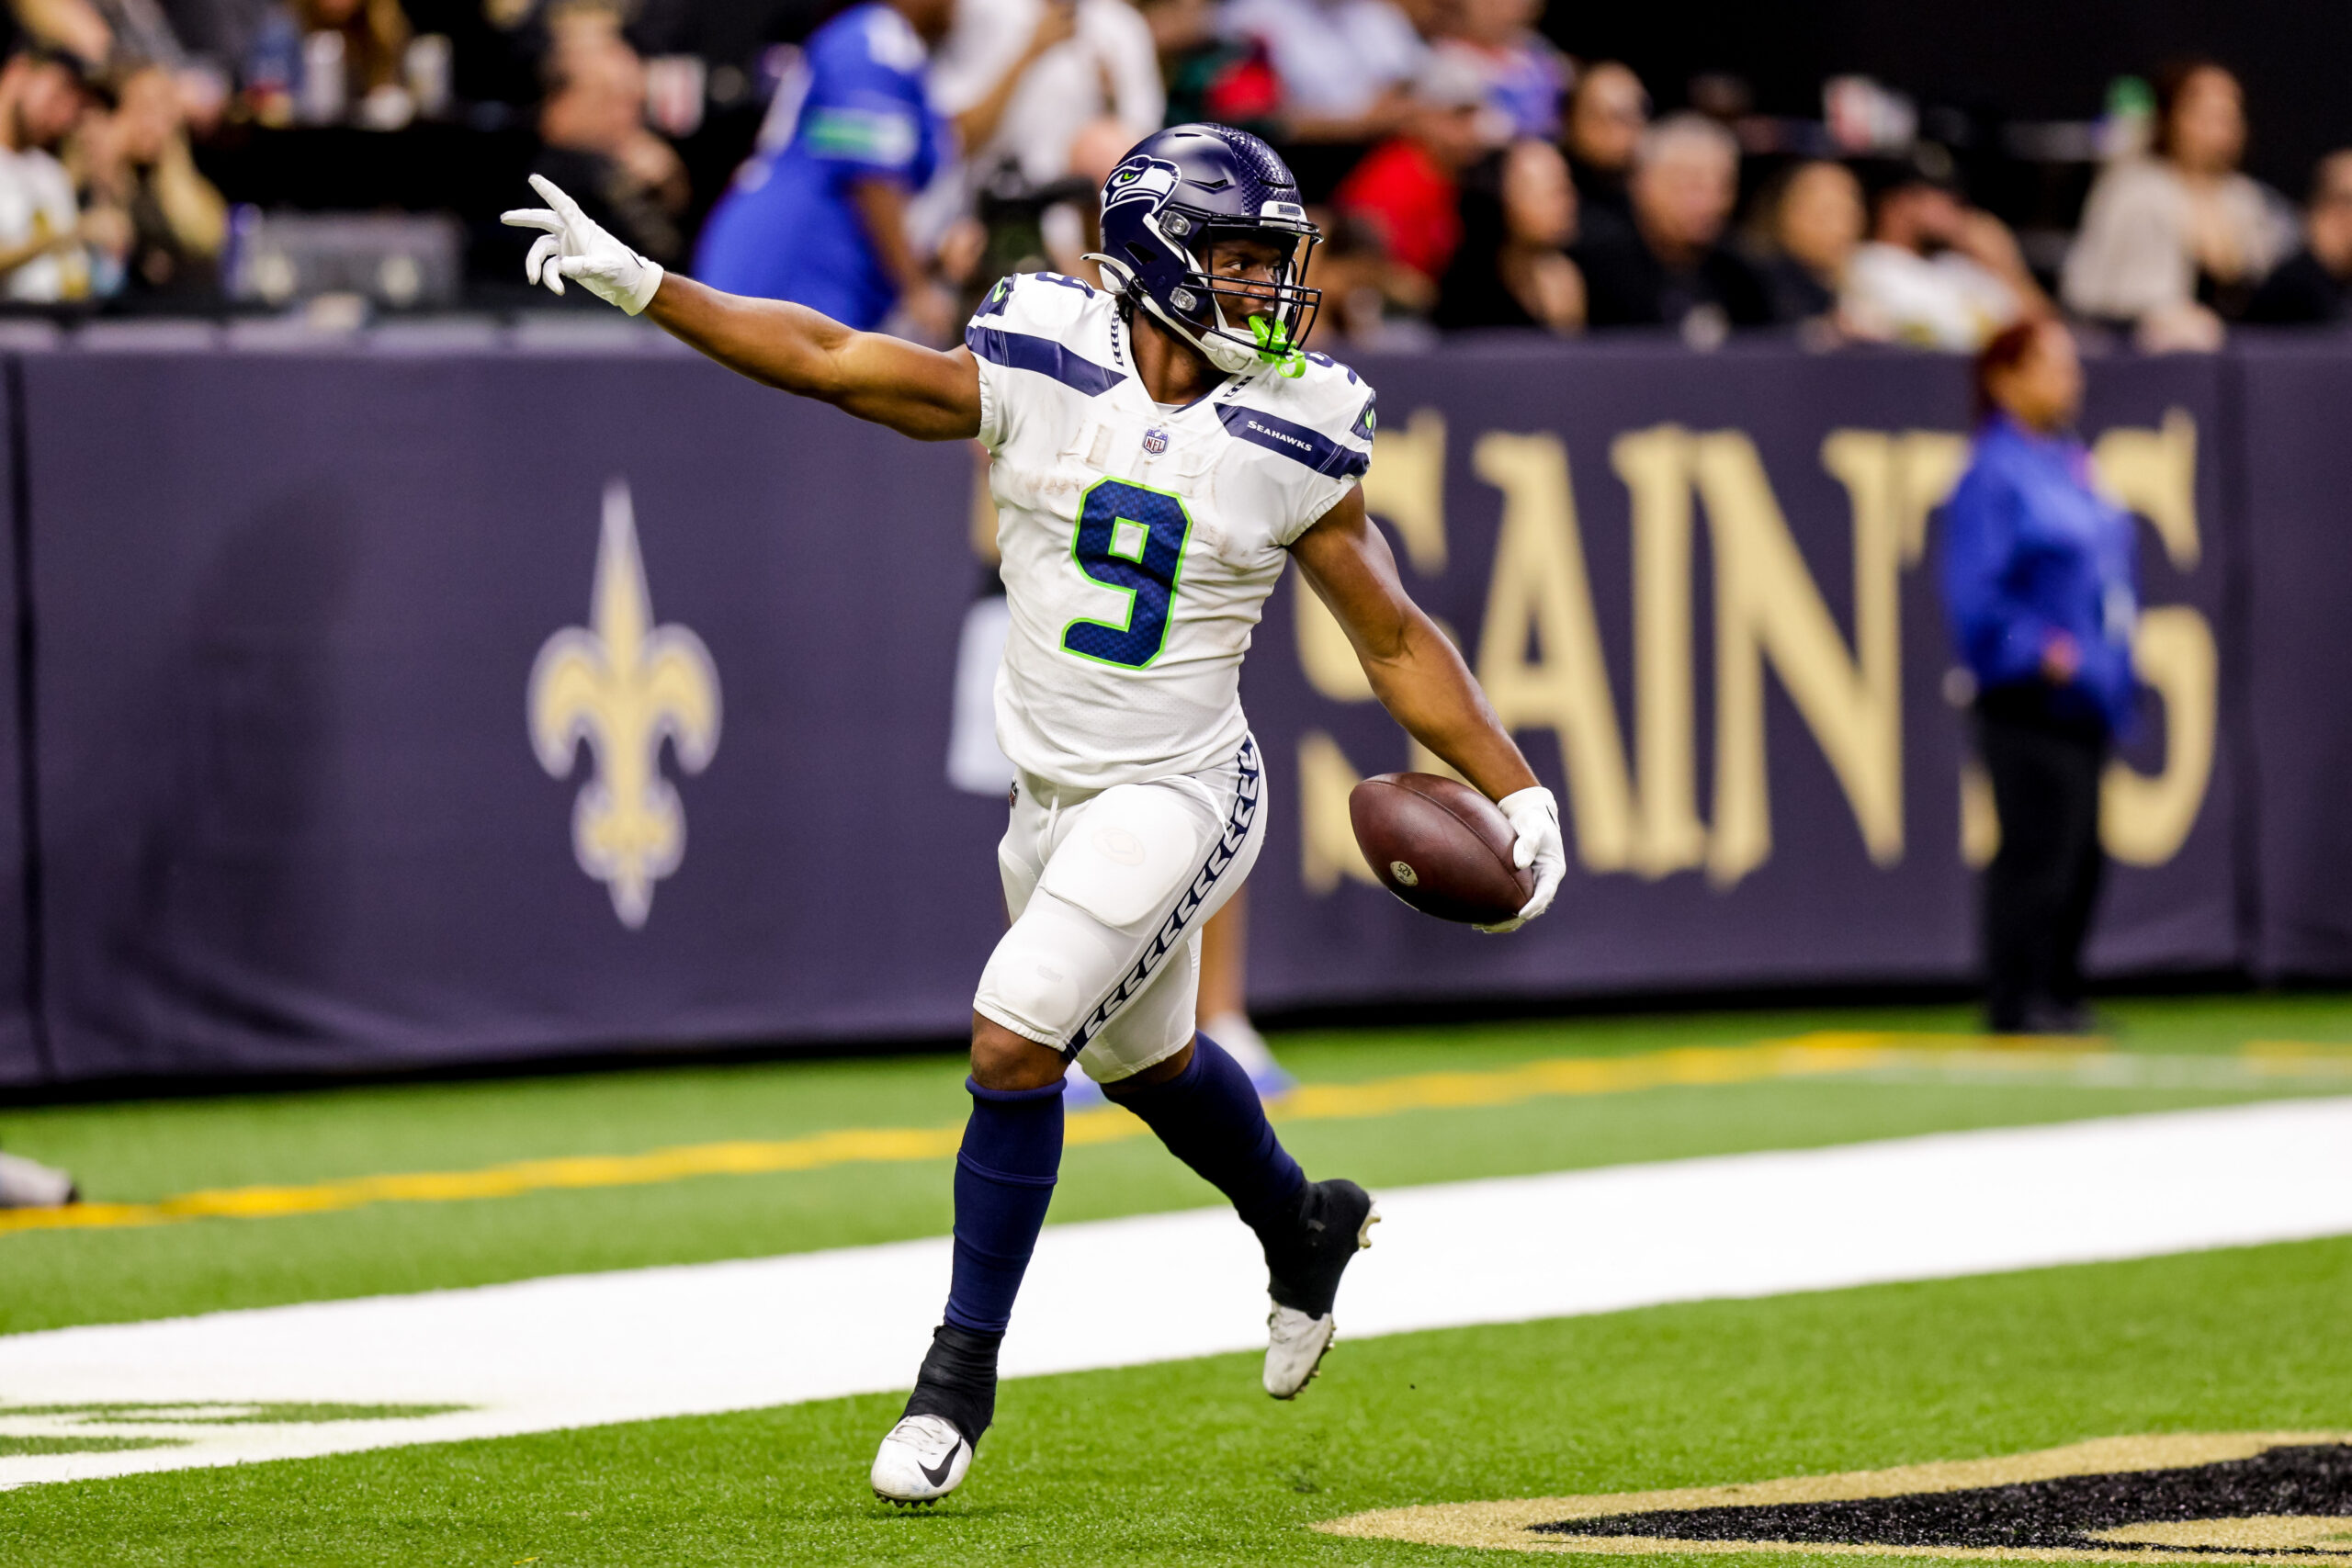 Late Kenneth Walker III touchdown lifts Seahawks to crucial NFC